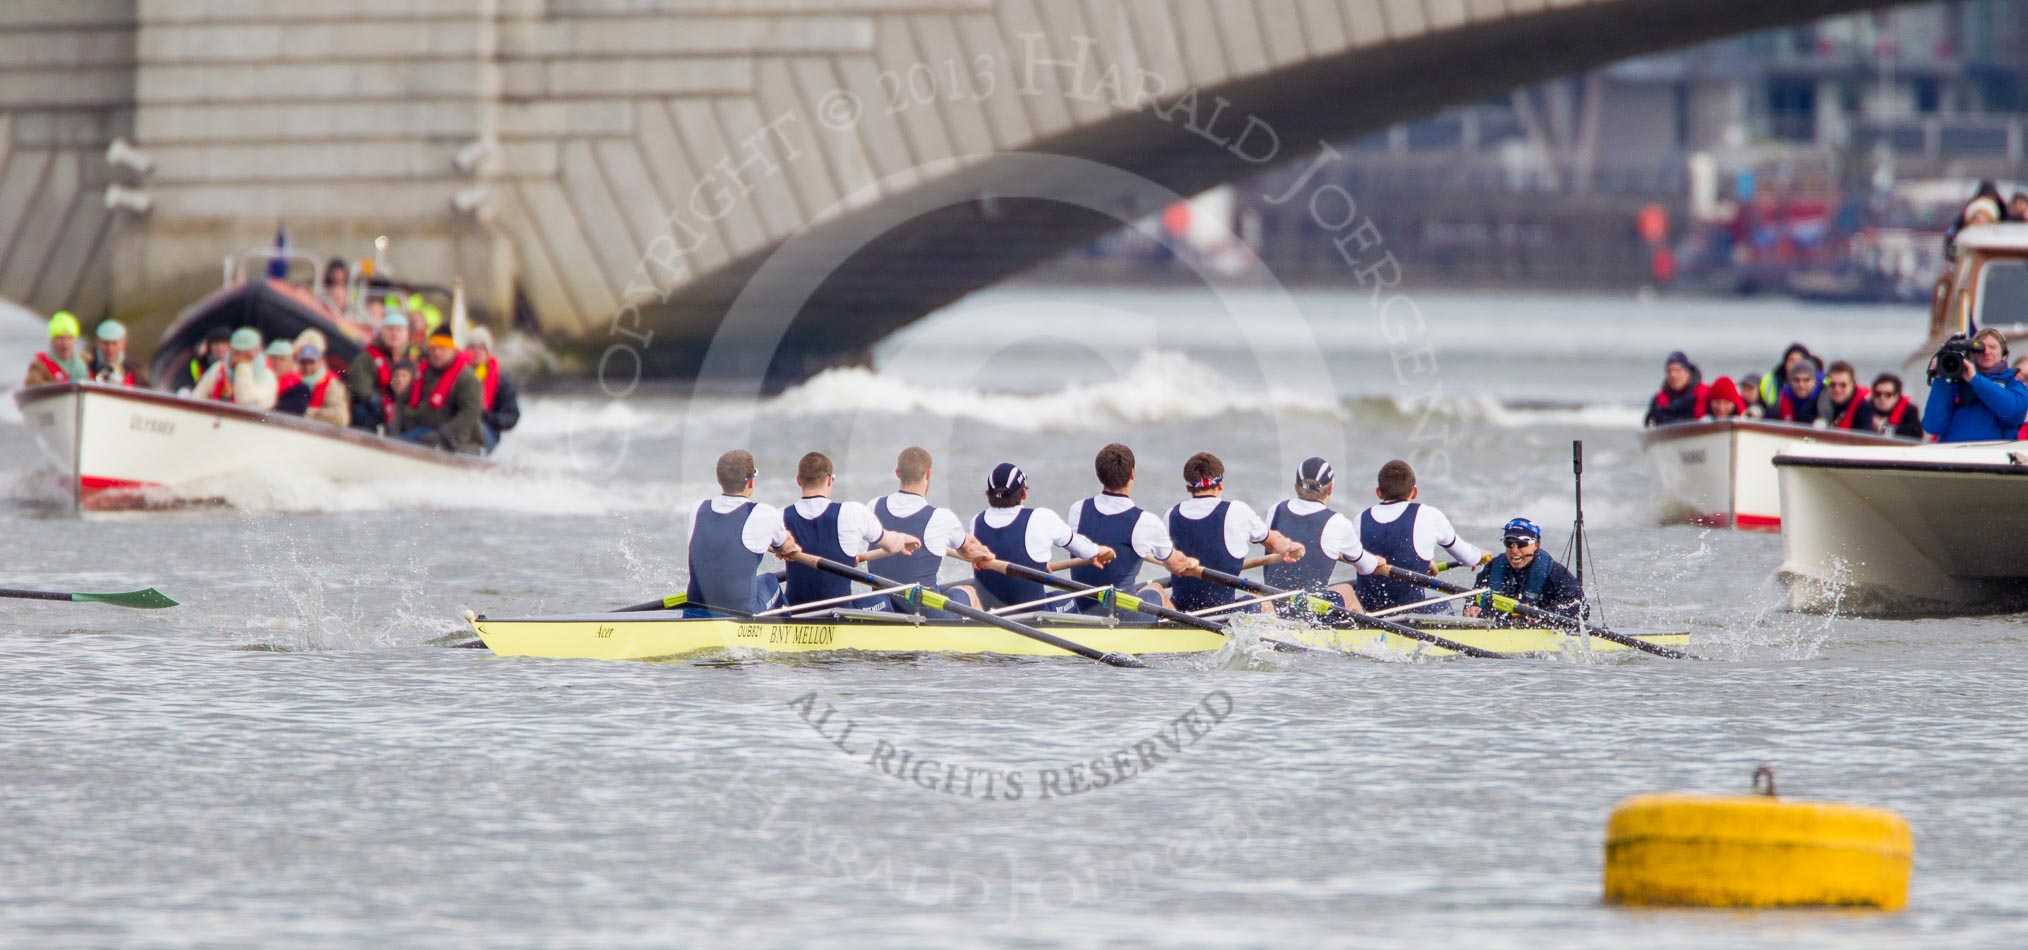 The Boat Race 2013.
Putney,
London SW15,

United Kingdom,
on 31 March 2013 at 16:31, image #268